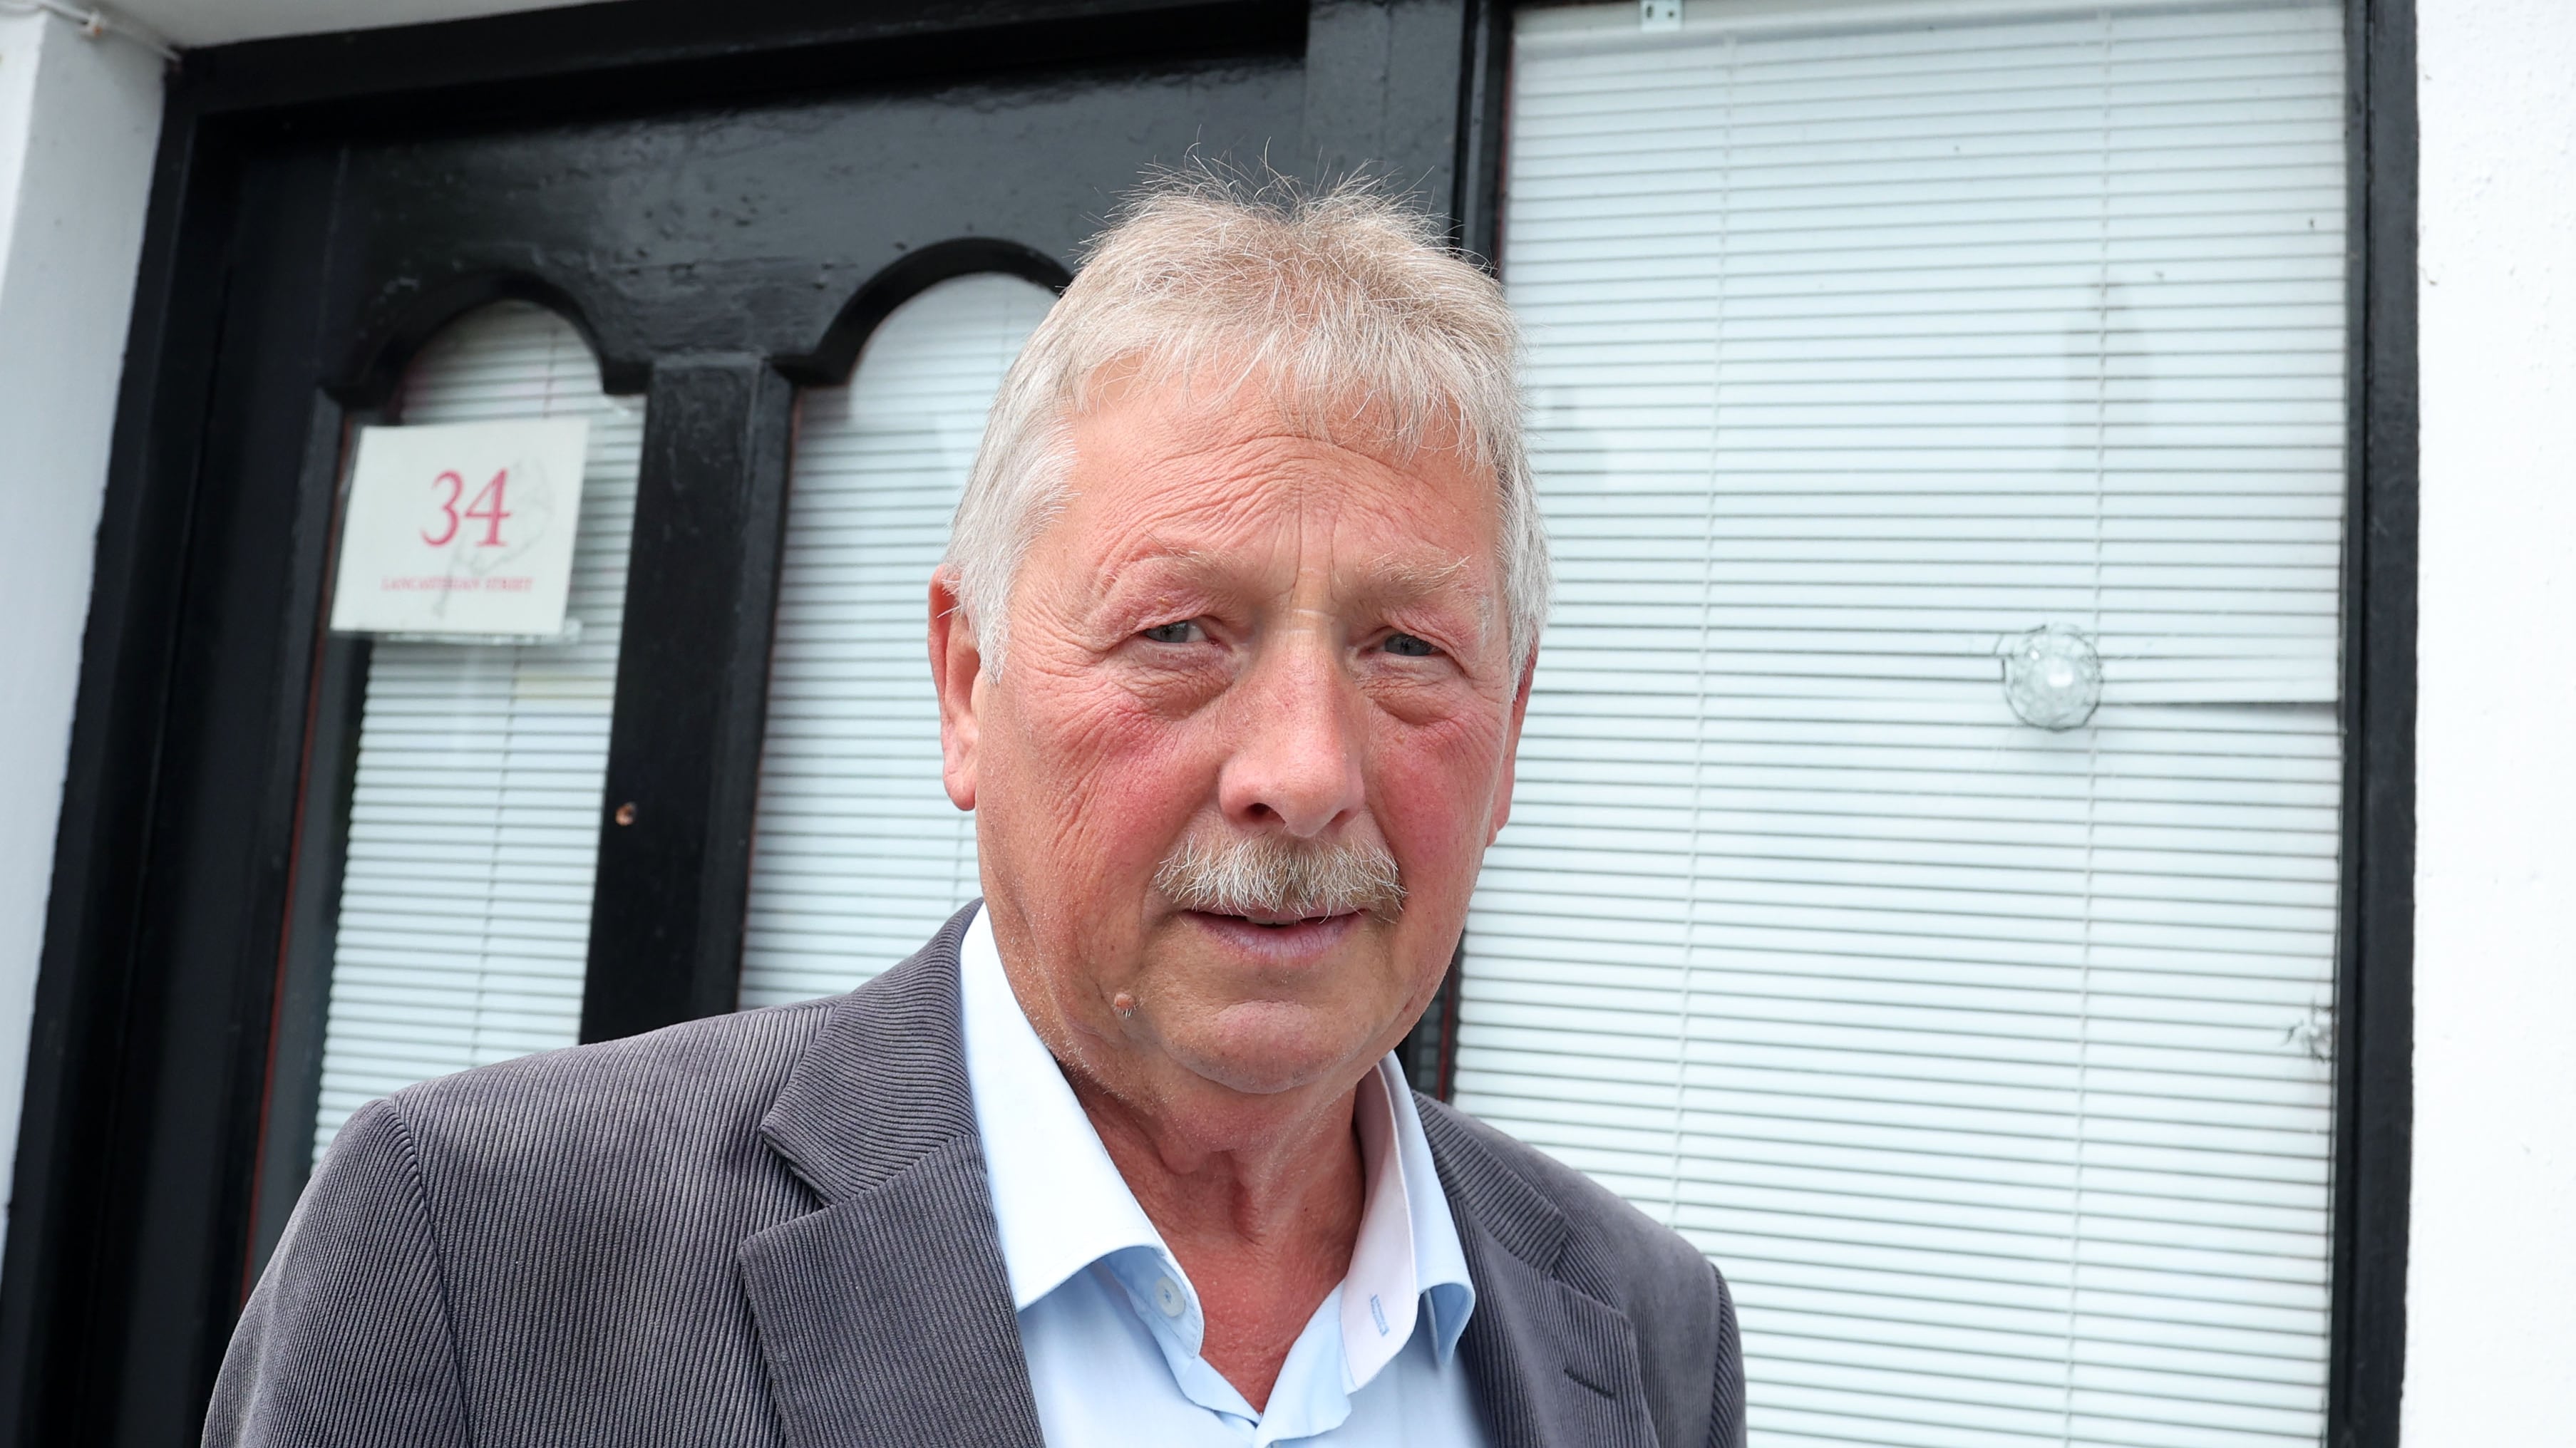 Shots have been fired at the Carrickfergus constituency office of DUP MP Sammy Wilson.
It is reported the shots were fired overnight.
PICTURE COLM LENAGHAN